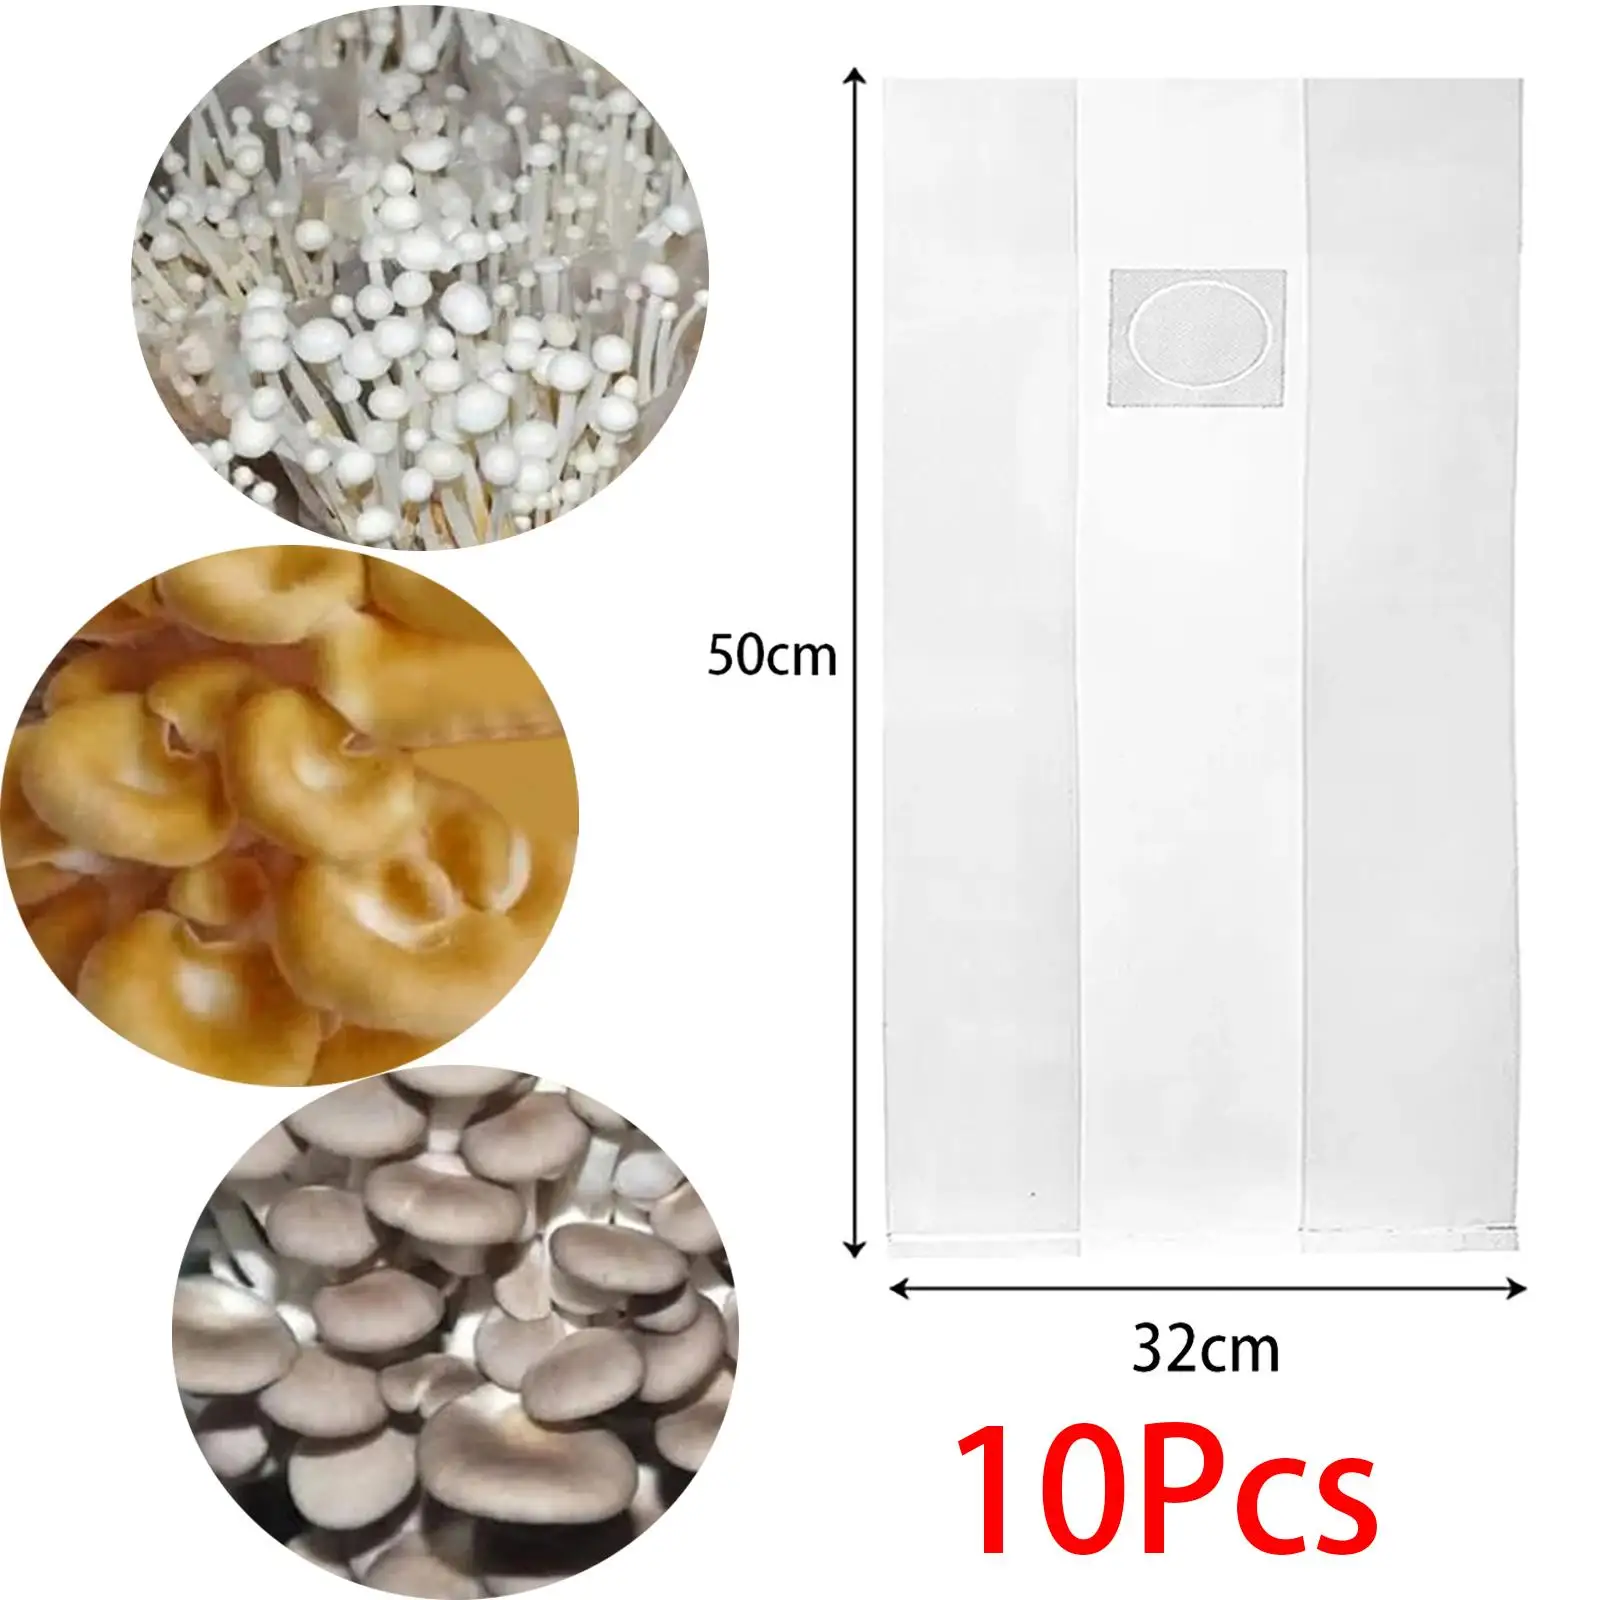 20Pcs Spawns Bags Grow Mushrooms Supplies Tear Resistant Strong Breathable 6 Mils Thick Edible Fungi Growing Bags Autoclave Bags